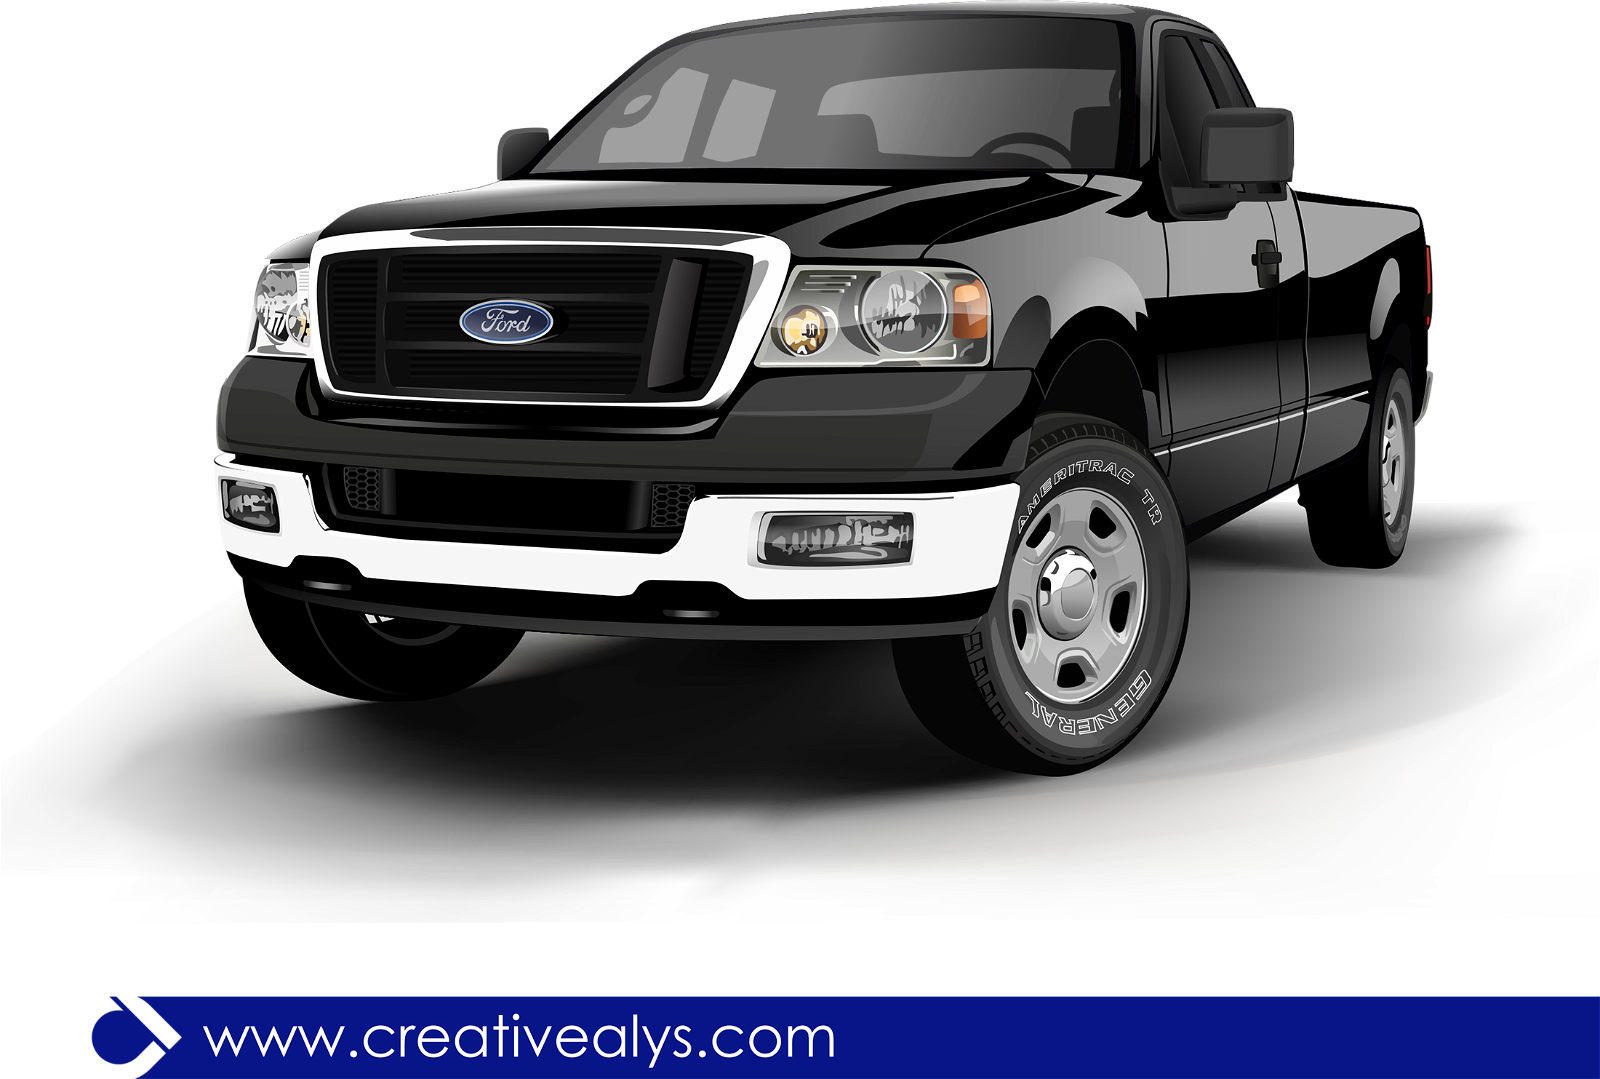 Download Ford Realistic Black Pickup Truck - Vector download